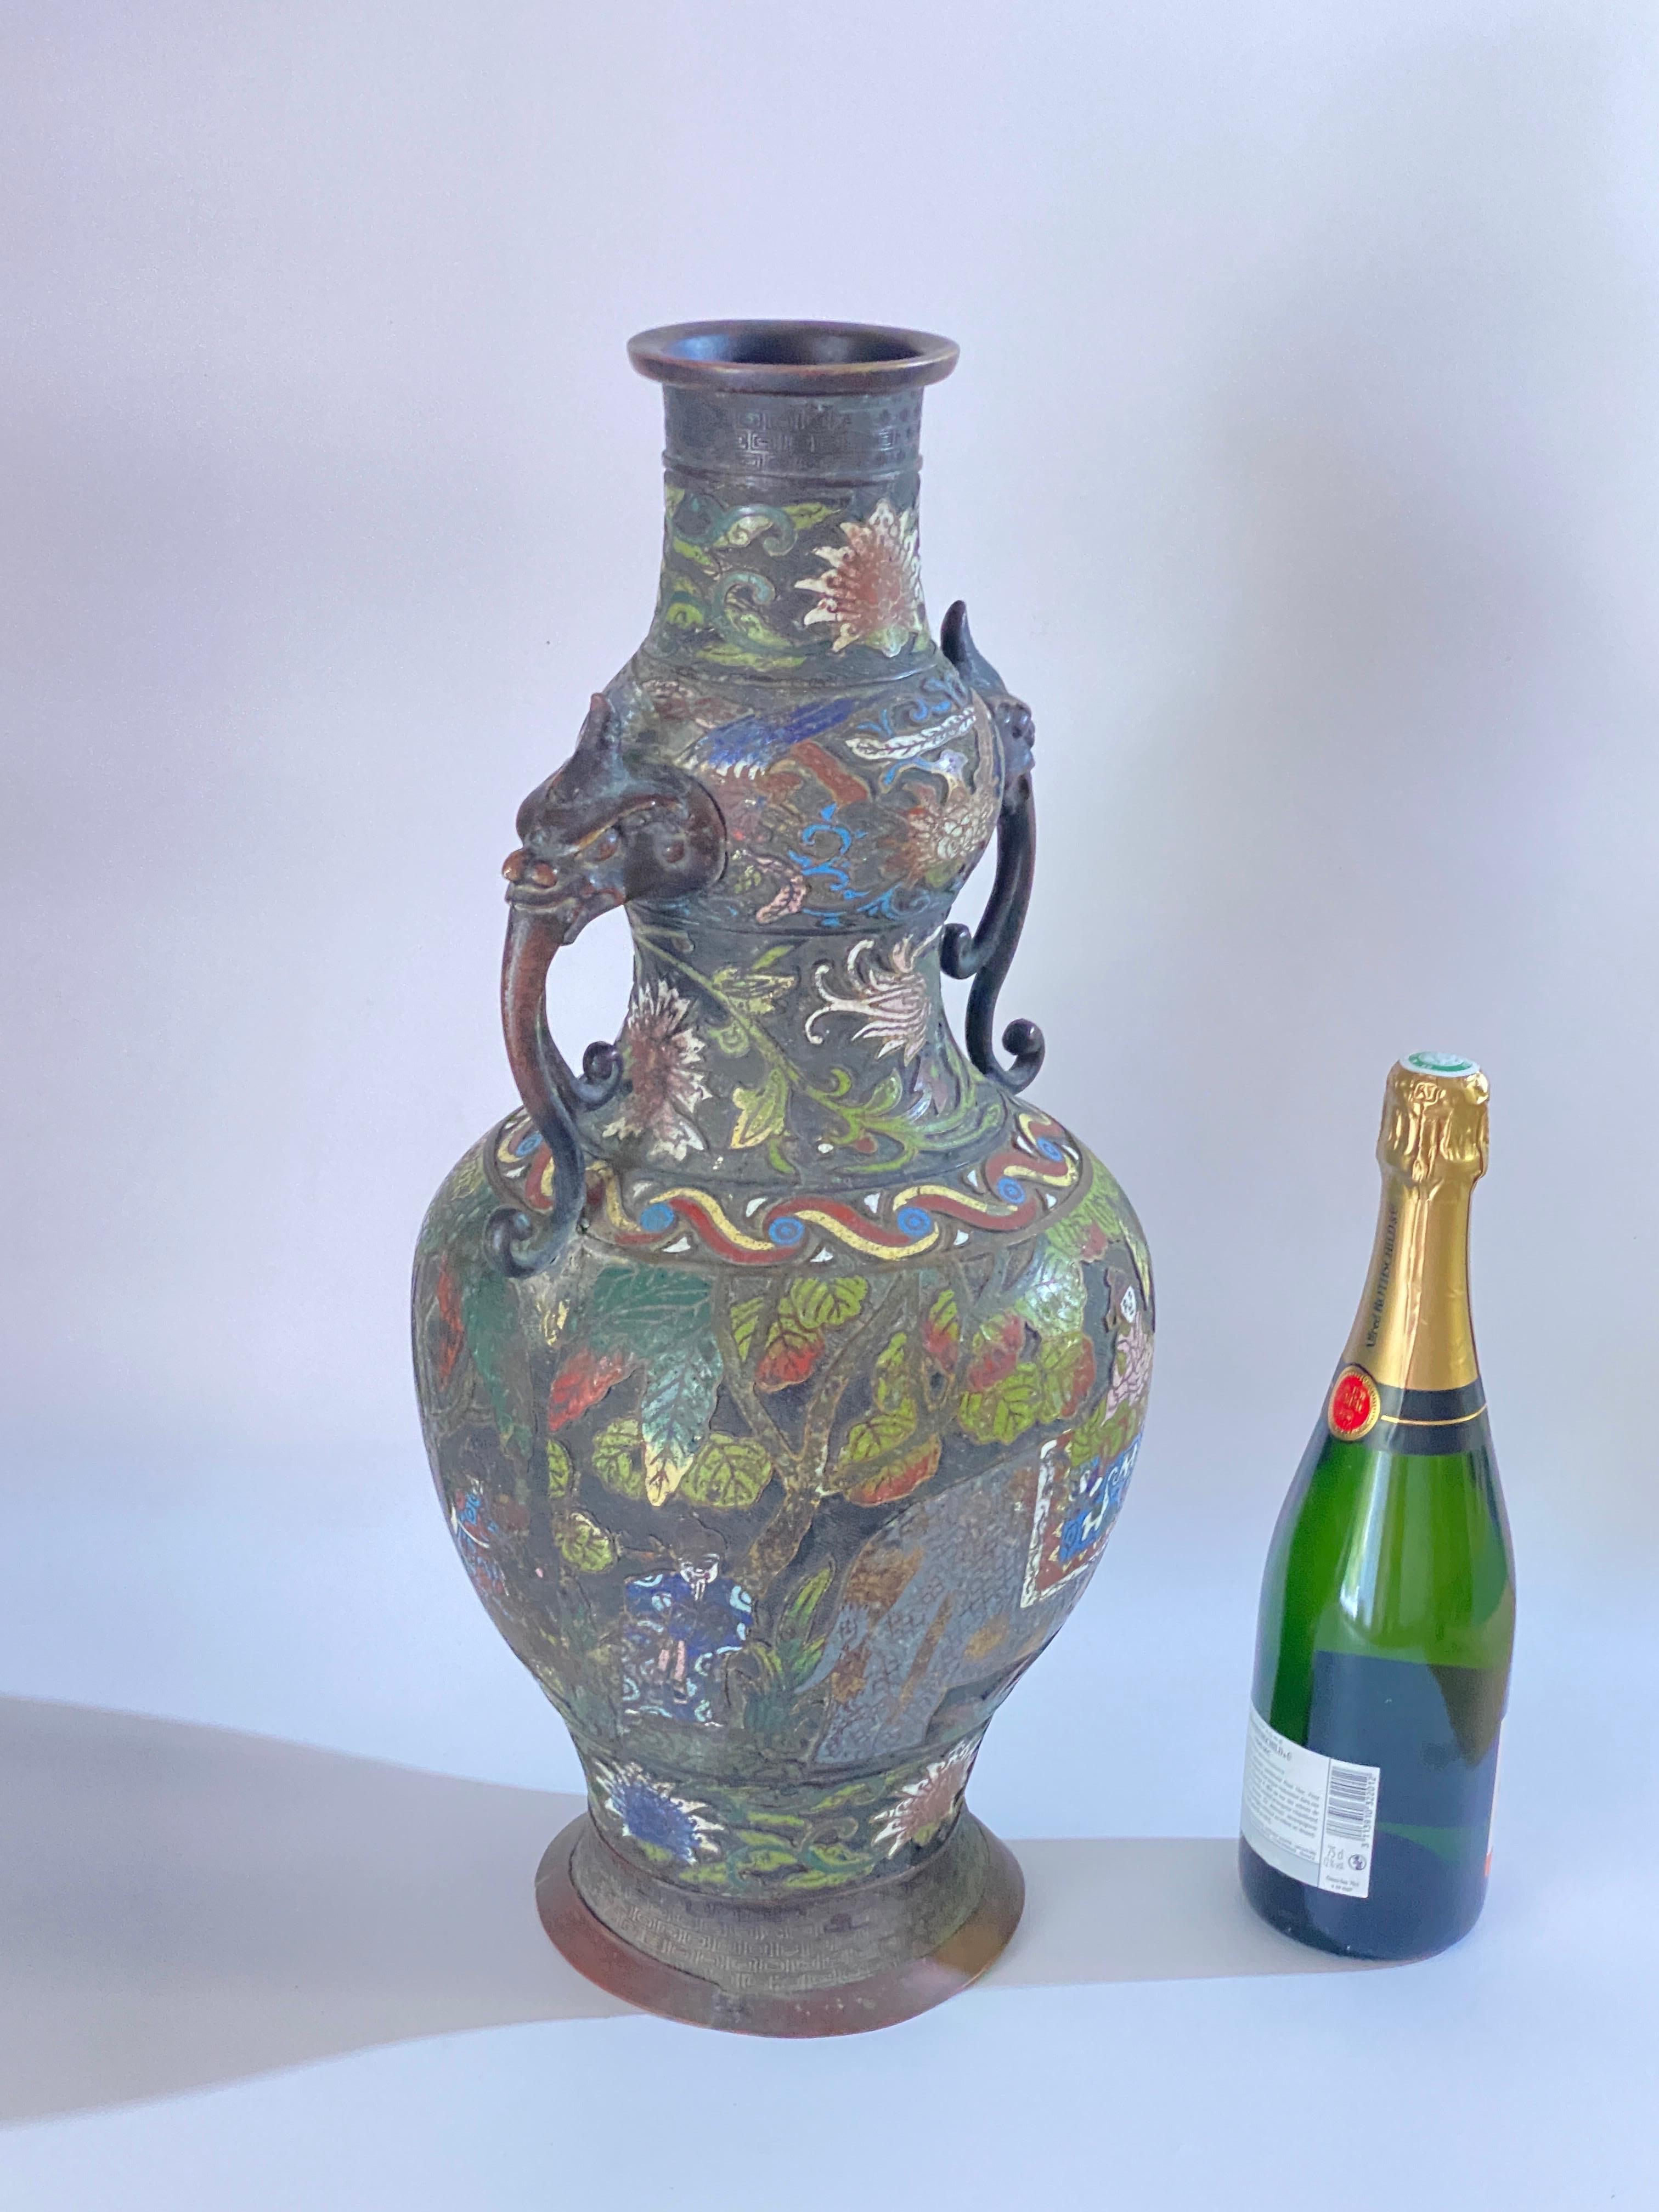 Large antique Chinese late 19th century Qing dynasty Cloisonné, Champlevé enameled bronze vase, circa 1890. The vase of archaic style and having twin handles and is sumptuously decorated with colored enamels depicting Imperial figures and stylized